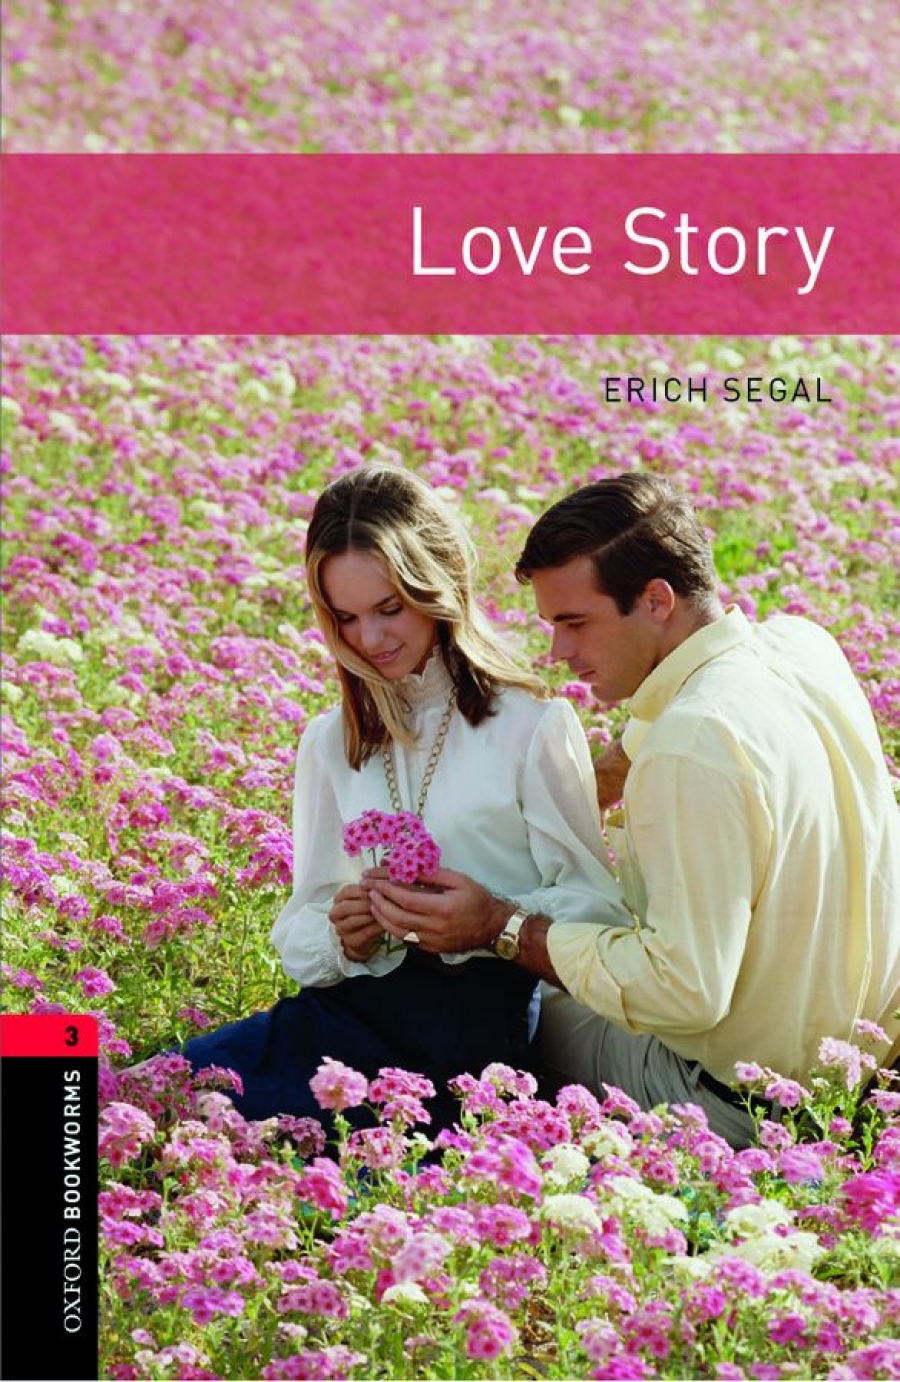 Erich Segal and Rosemary Border OBL 3: Love Story 